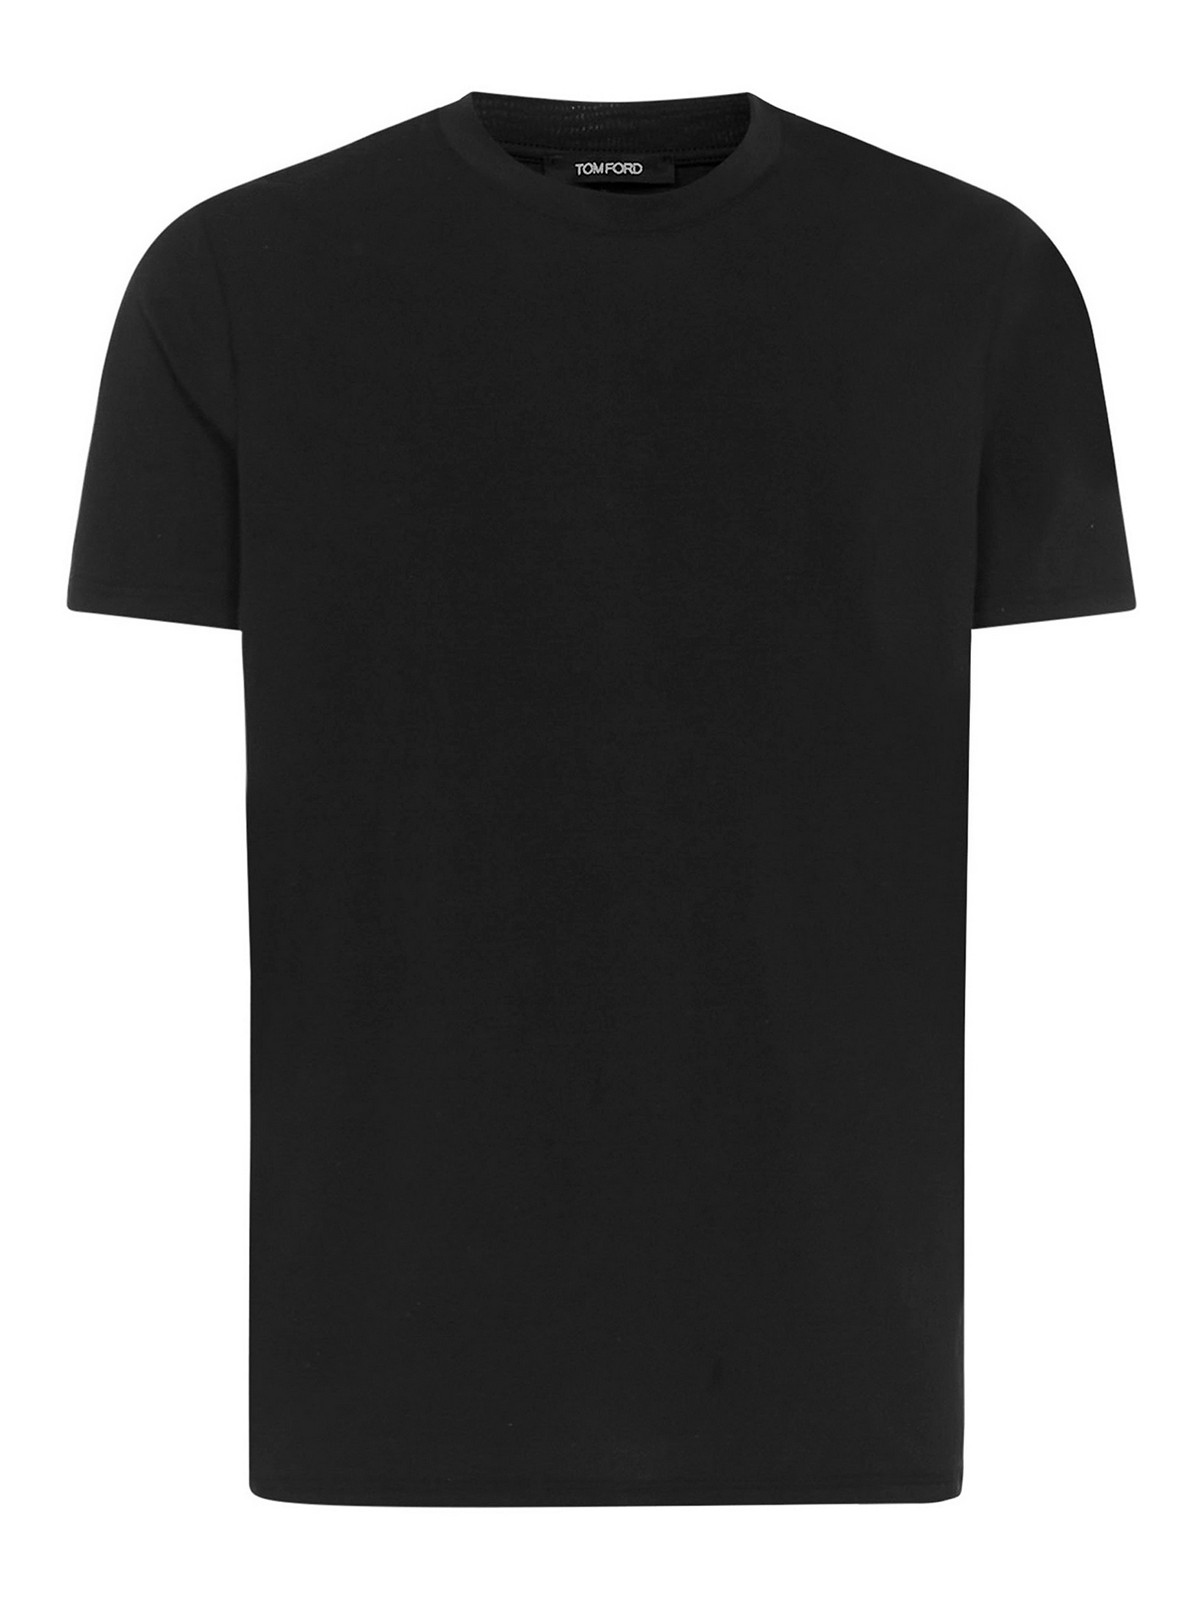 Tom Ford Jersey T-shirt In Black